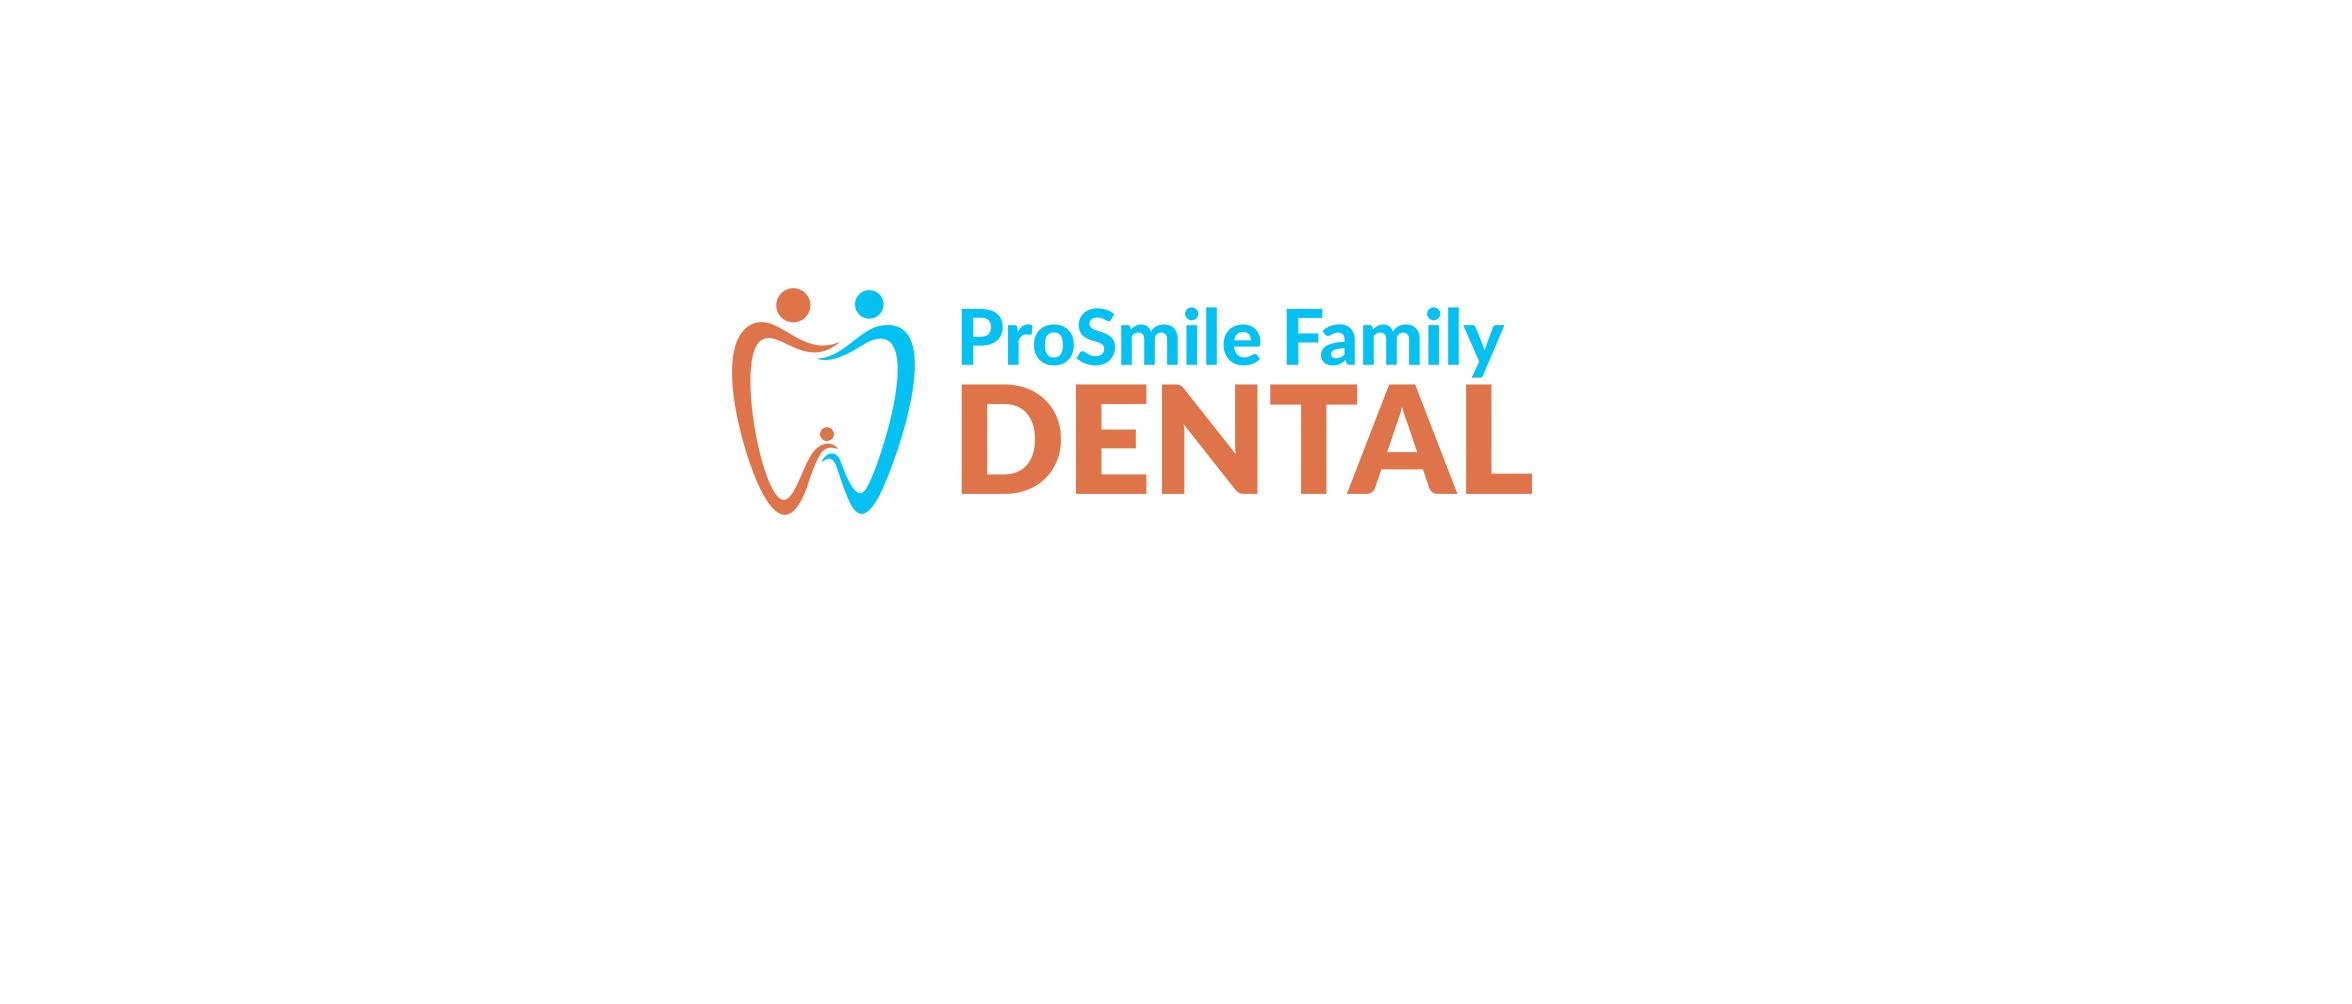 ProSmile family dental Clinic is a professional dentistry in Modesto, CA. Get all types of dental services: anxiety-management, teeth-whitening, etc.